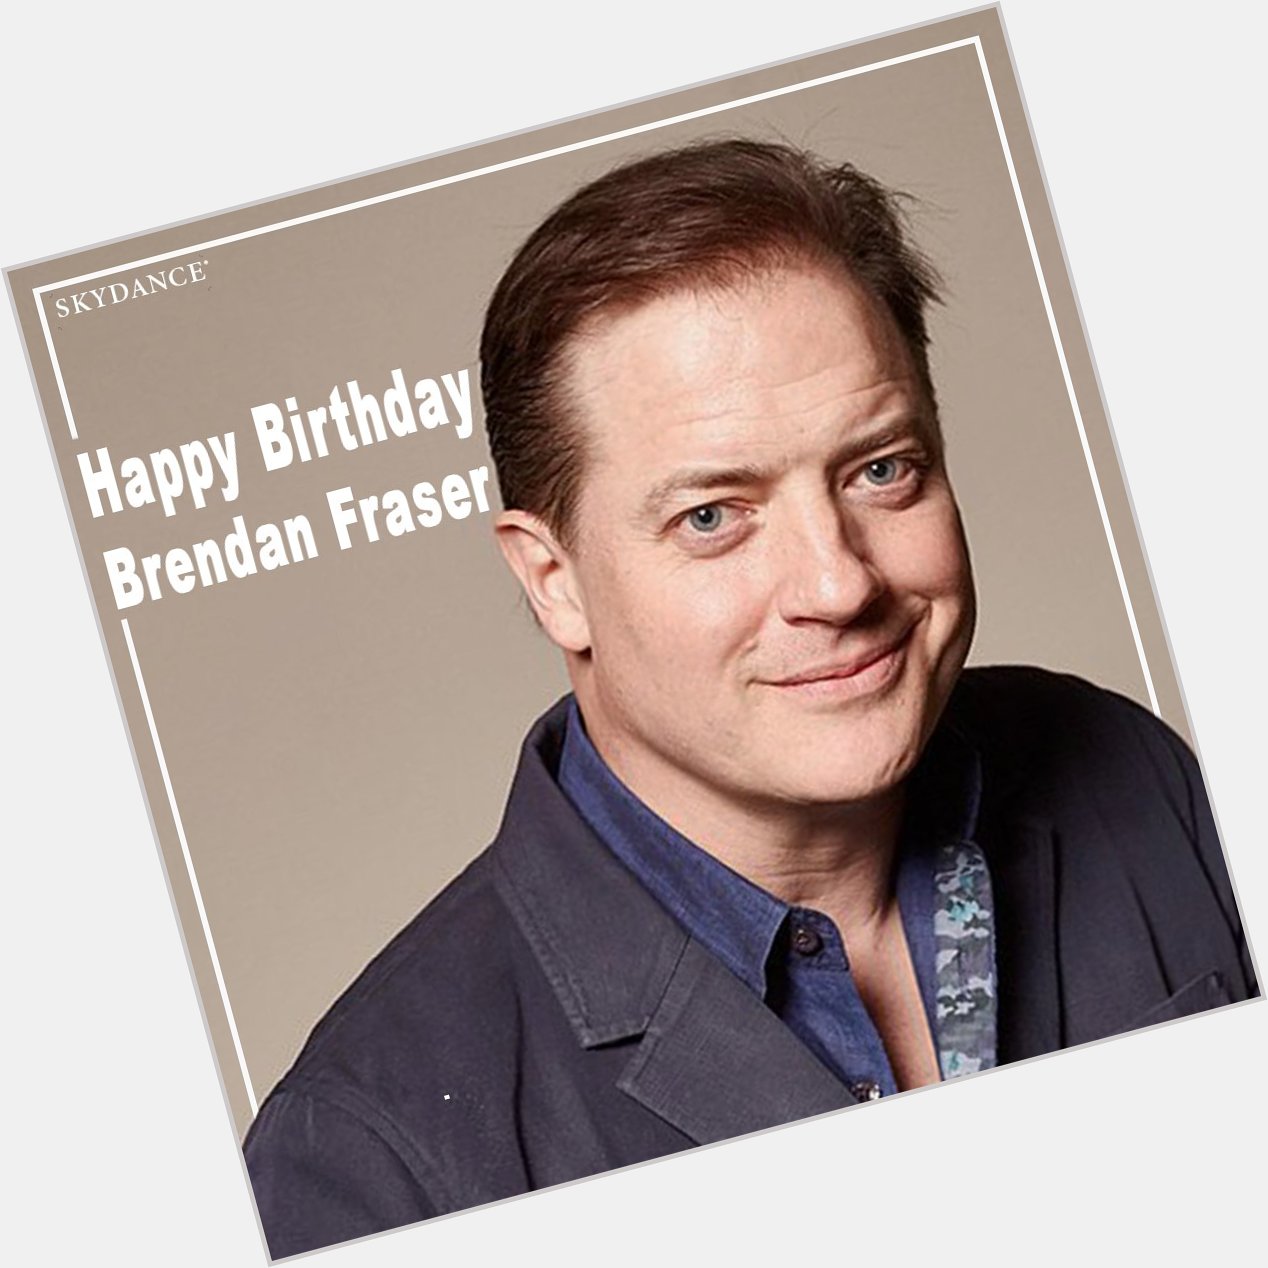 Happy birthday to Brendan Fraser from our upcoming show on AT&T Audience Network! 